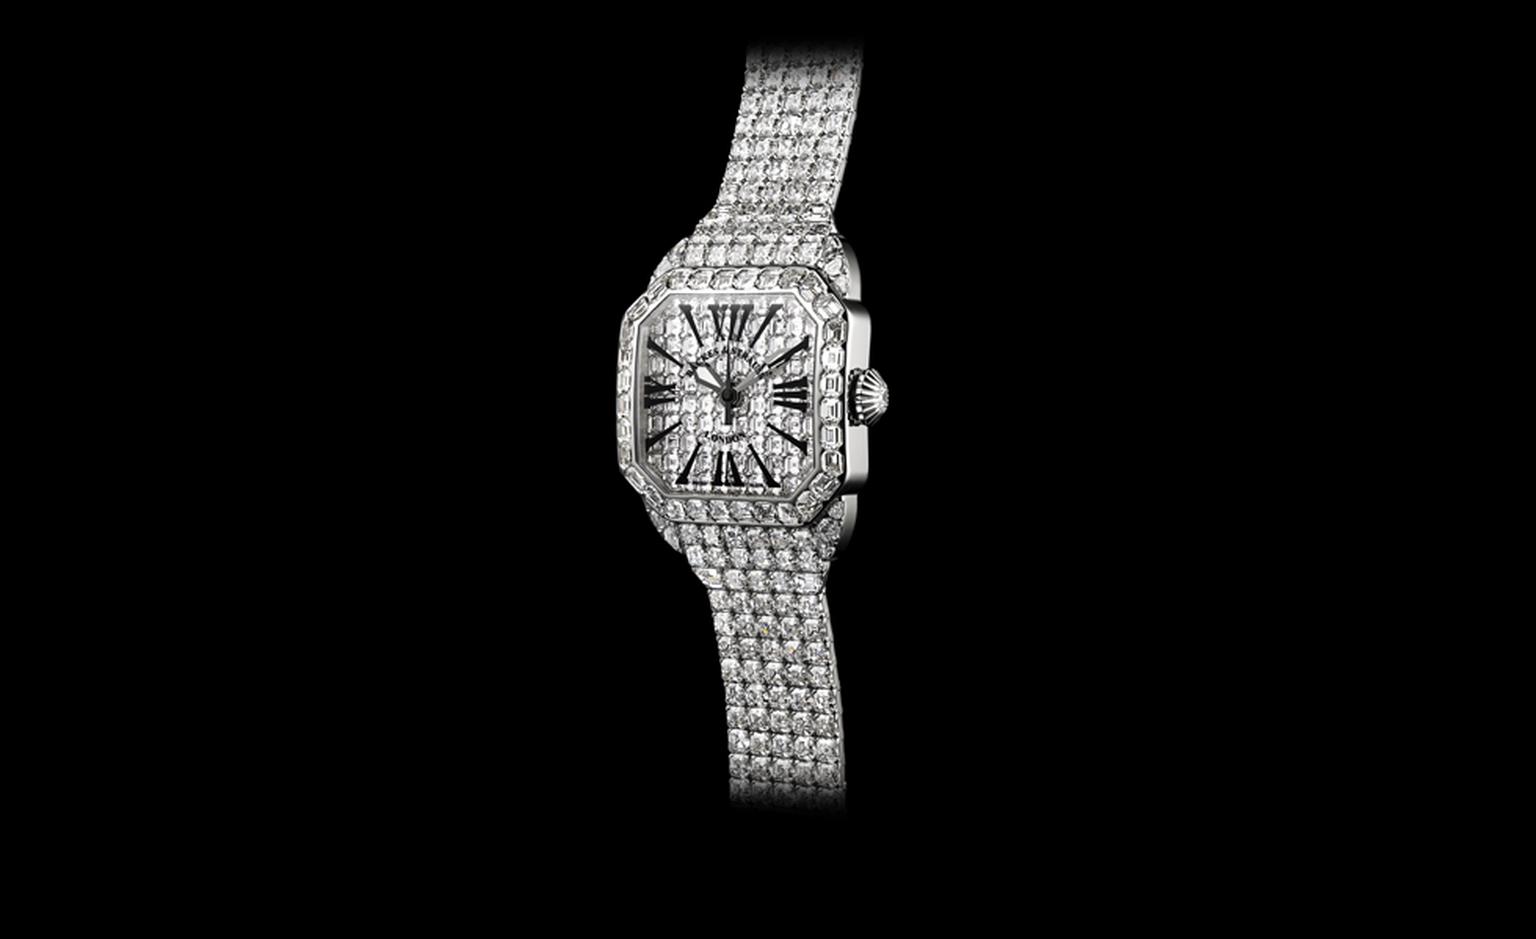 Backes & Strauss. The Royal Berkeley 40, from The Royal Collection, a bespoke masterpiece, Limited Edition. Diamonds hand polished, custom cut and precision set in white gold. Price from £1,114,290.00.